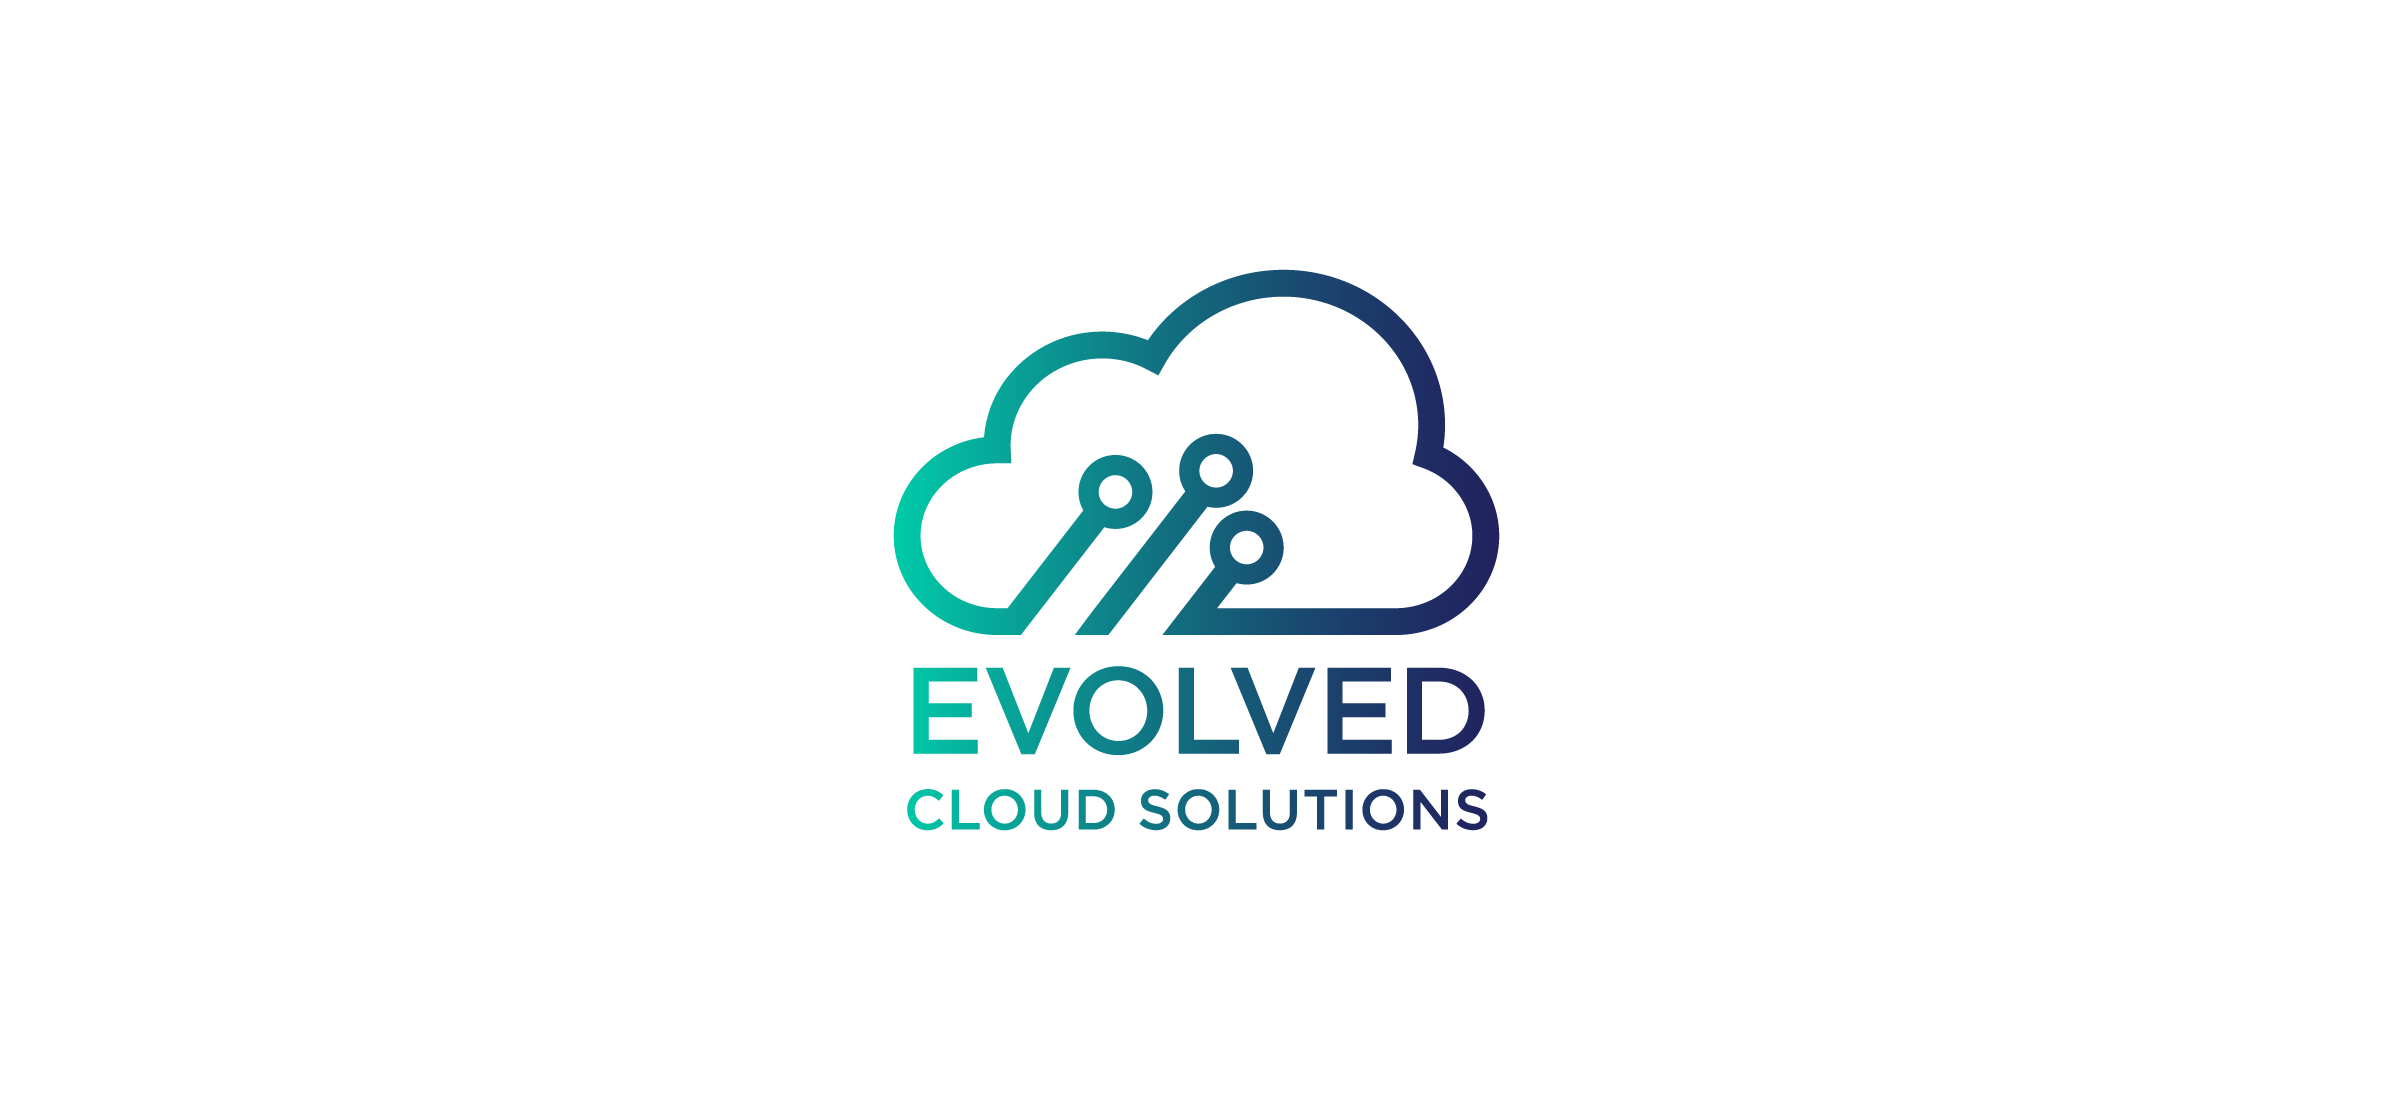 The Evolved Cloud Solutions logo